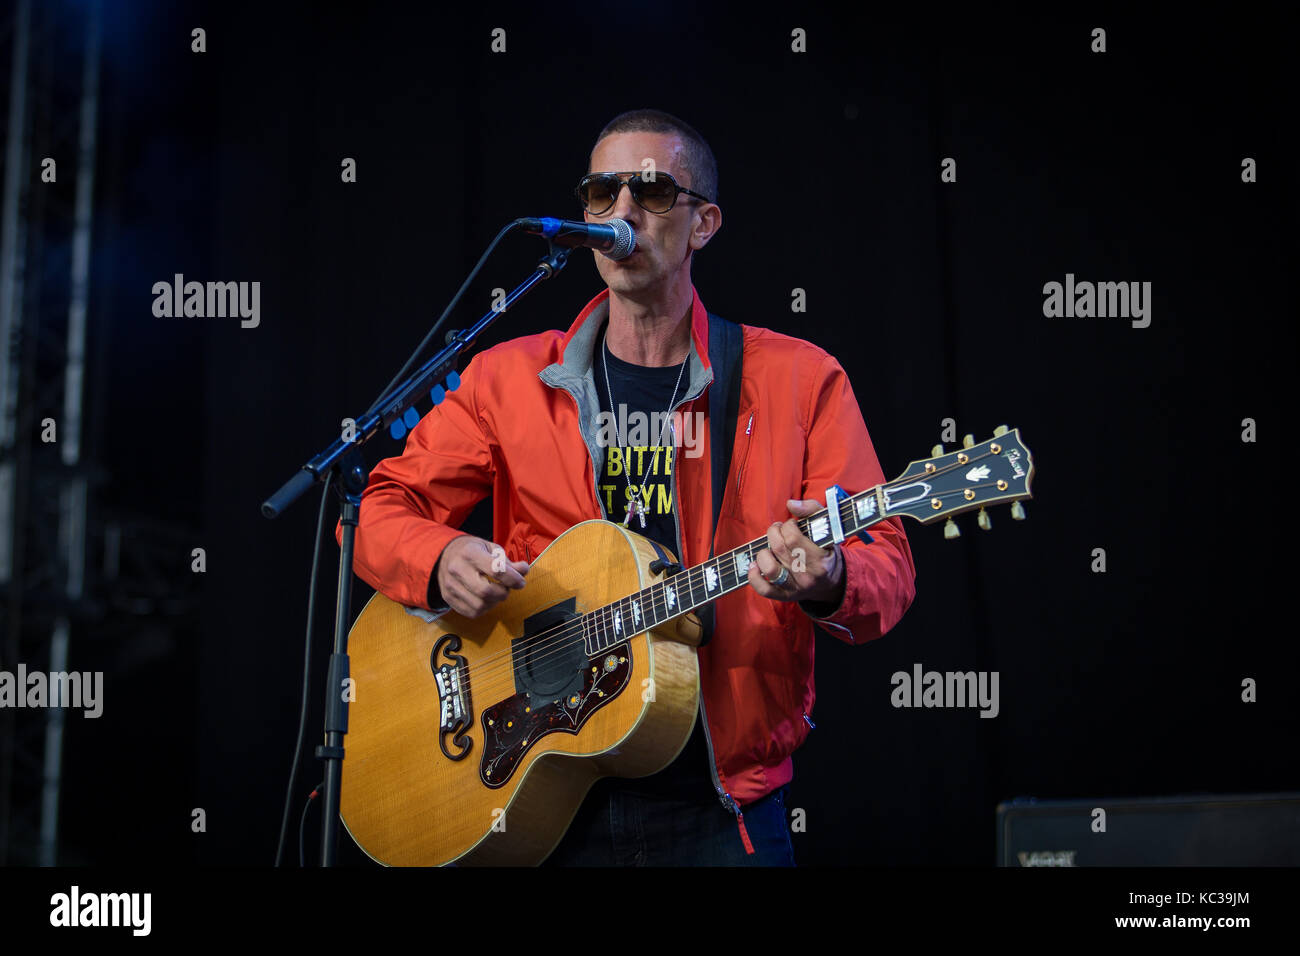 The English singer, songwriter and musician Richard Ashcroft performs a live concert during the Norwegian music festival Bergenfest 2017 in Bergen. Richard Ashcroft is known as the lead vocalist of the English rock band The Verve. Norway, 14/06 2017. Stock Photo